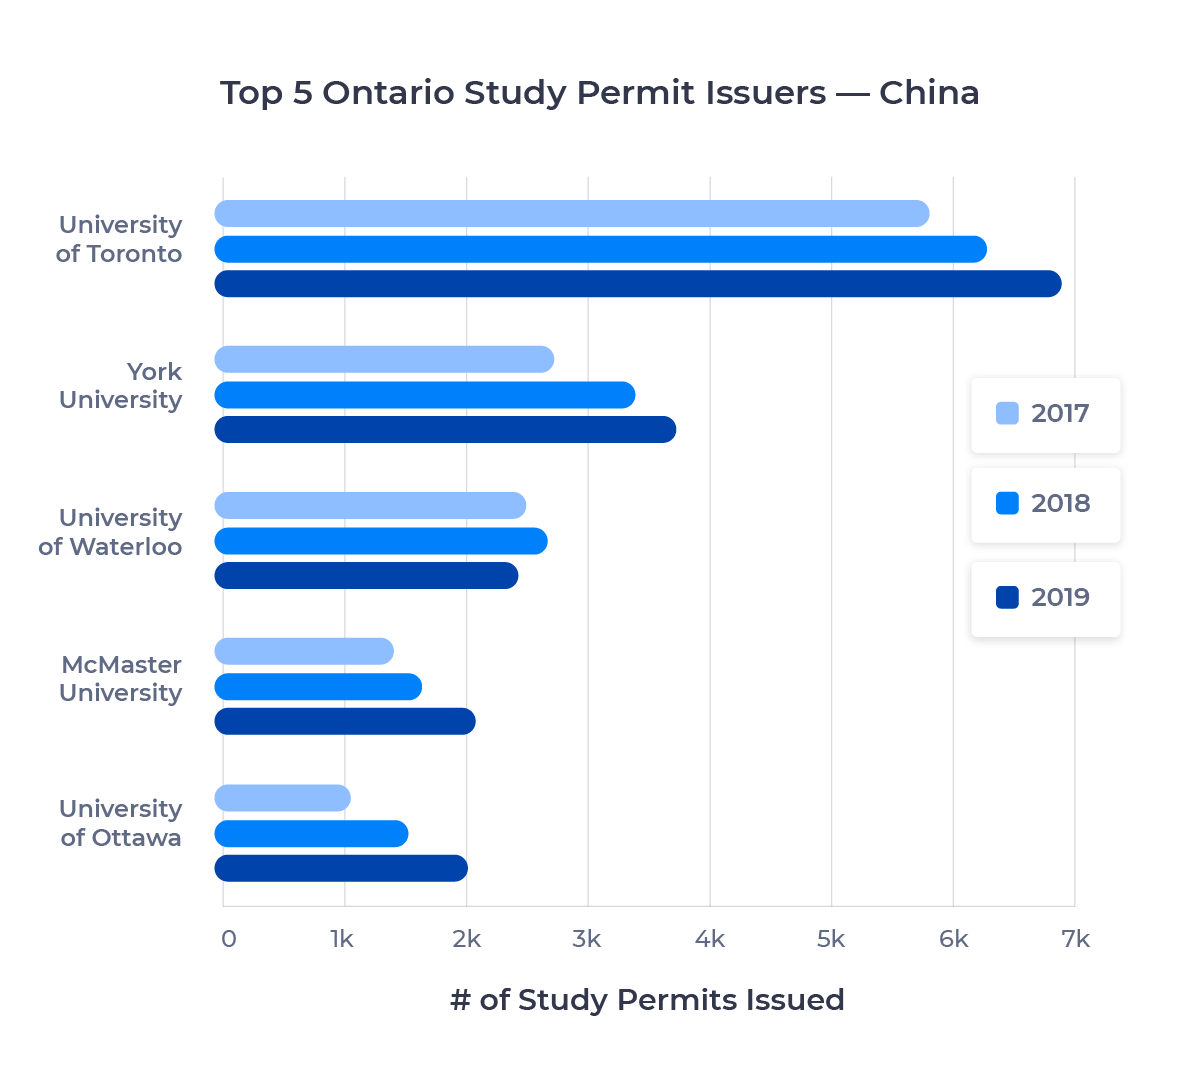 Bar chart showing the top five schools in Ontario for Chinese students by study permits issued. Described in detail below.